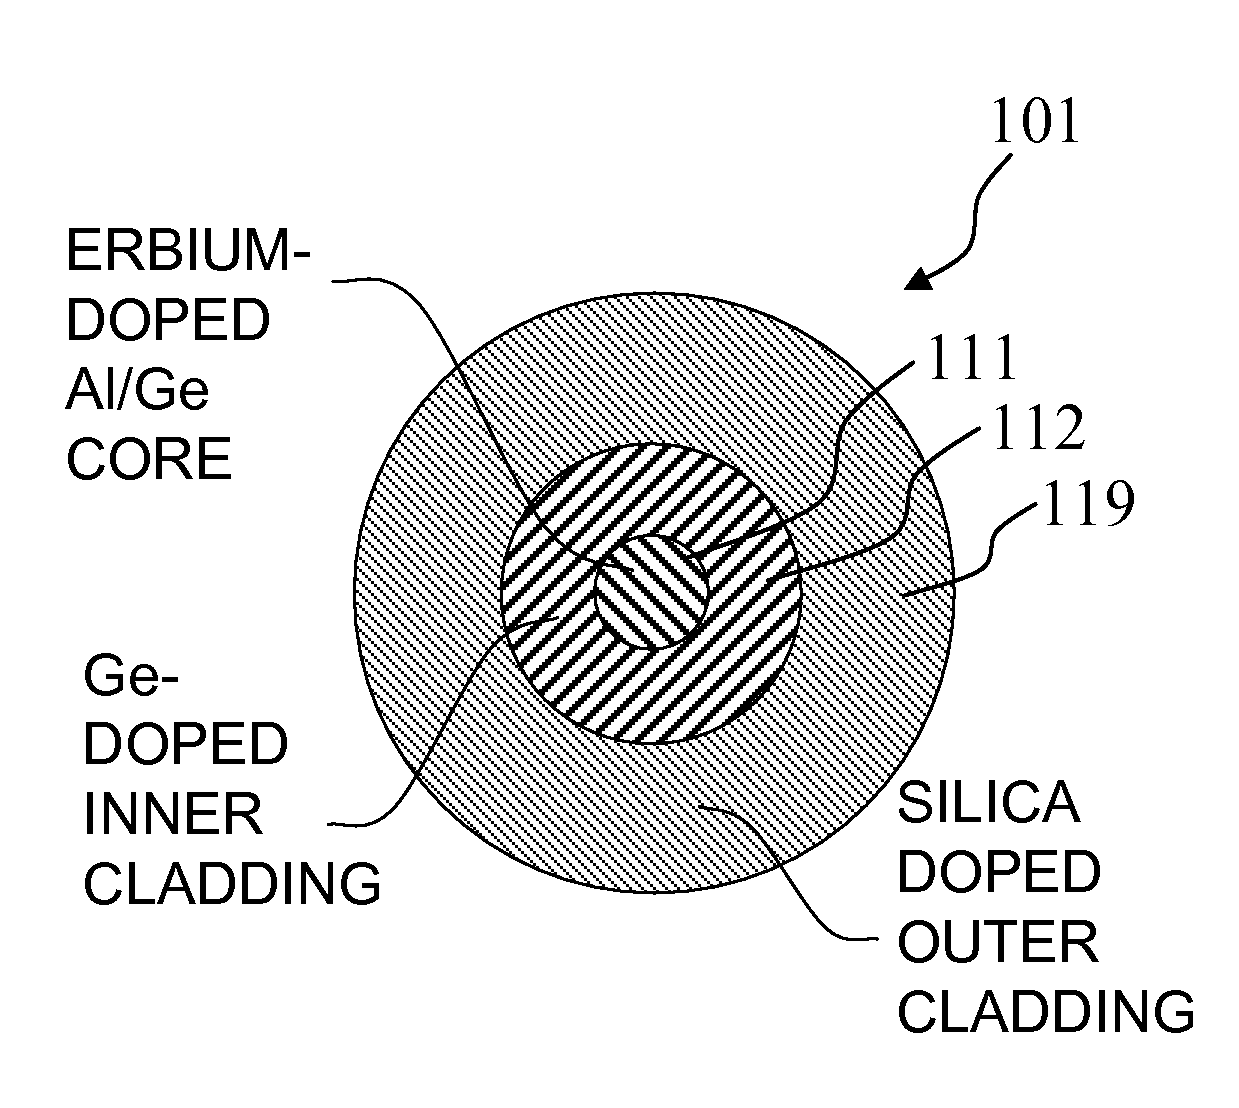 Apparatus and method for an erbium-doped fiber for high peak-power applications